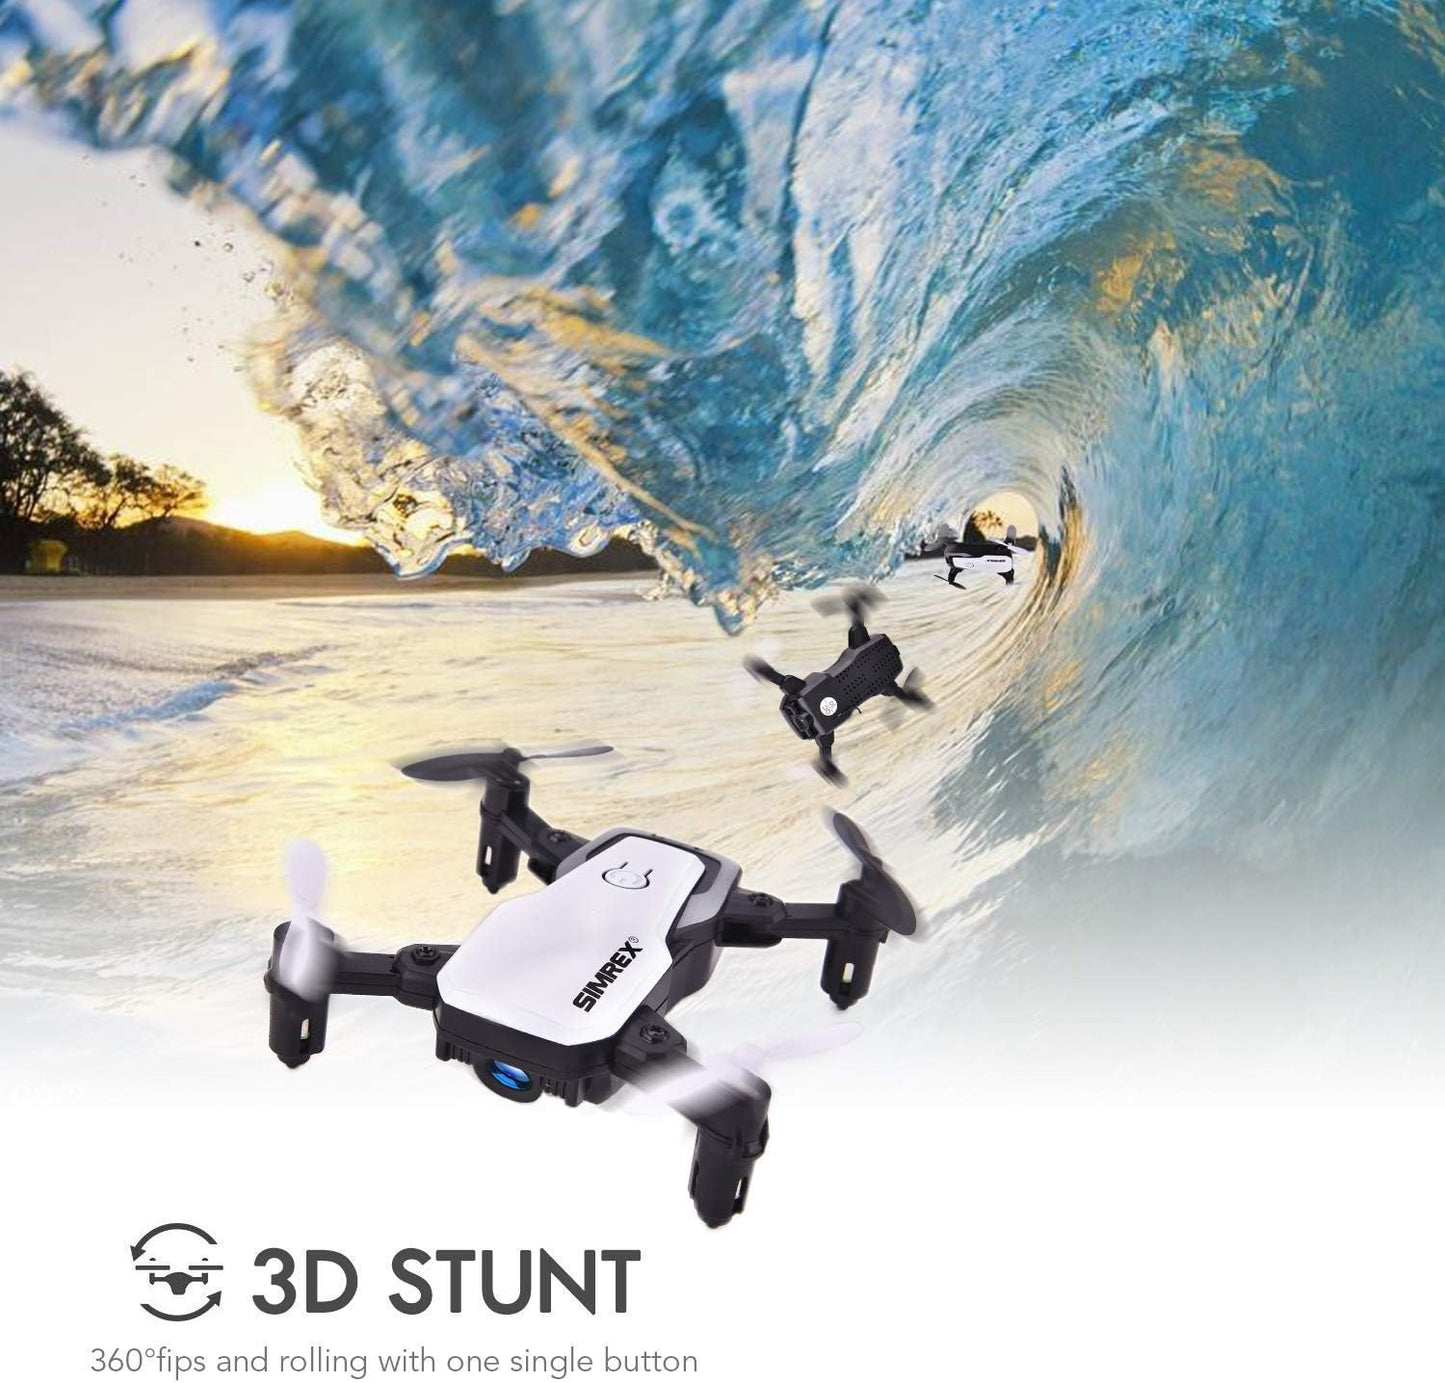 SIMREX X300C 8816 Mini Drone with Camera WiFi HD FPV Foldable RC Quadcopter Rtf 4CH 2.4Ghz Remote Control Headless [Altitude Hold] Super Easy Fly for Training White